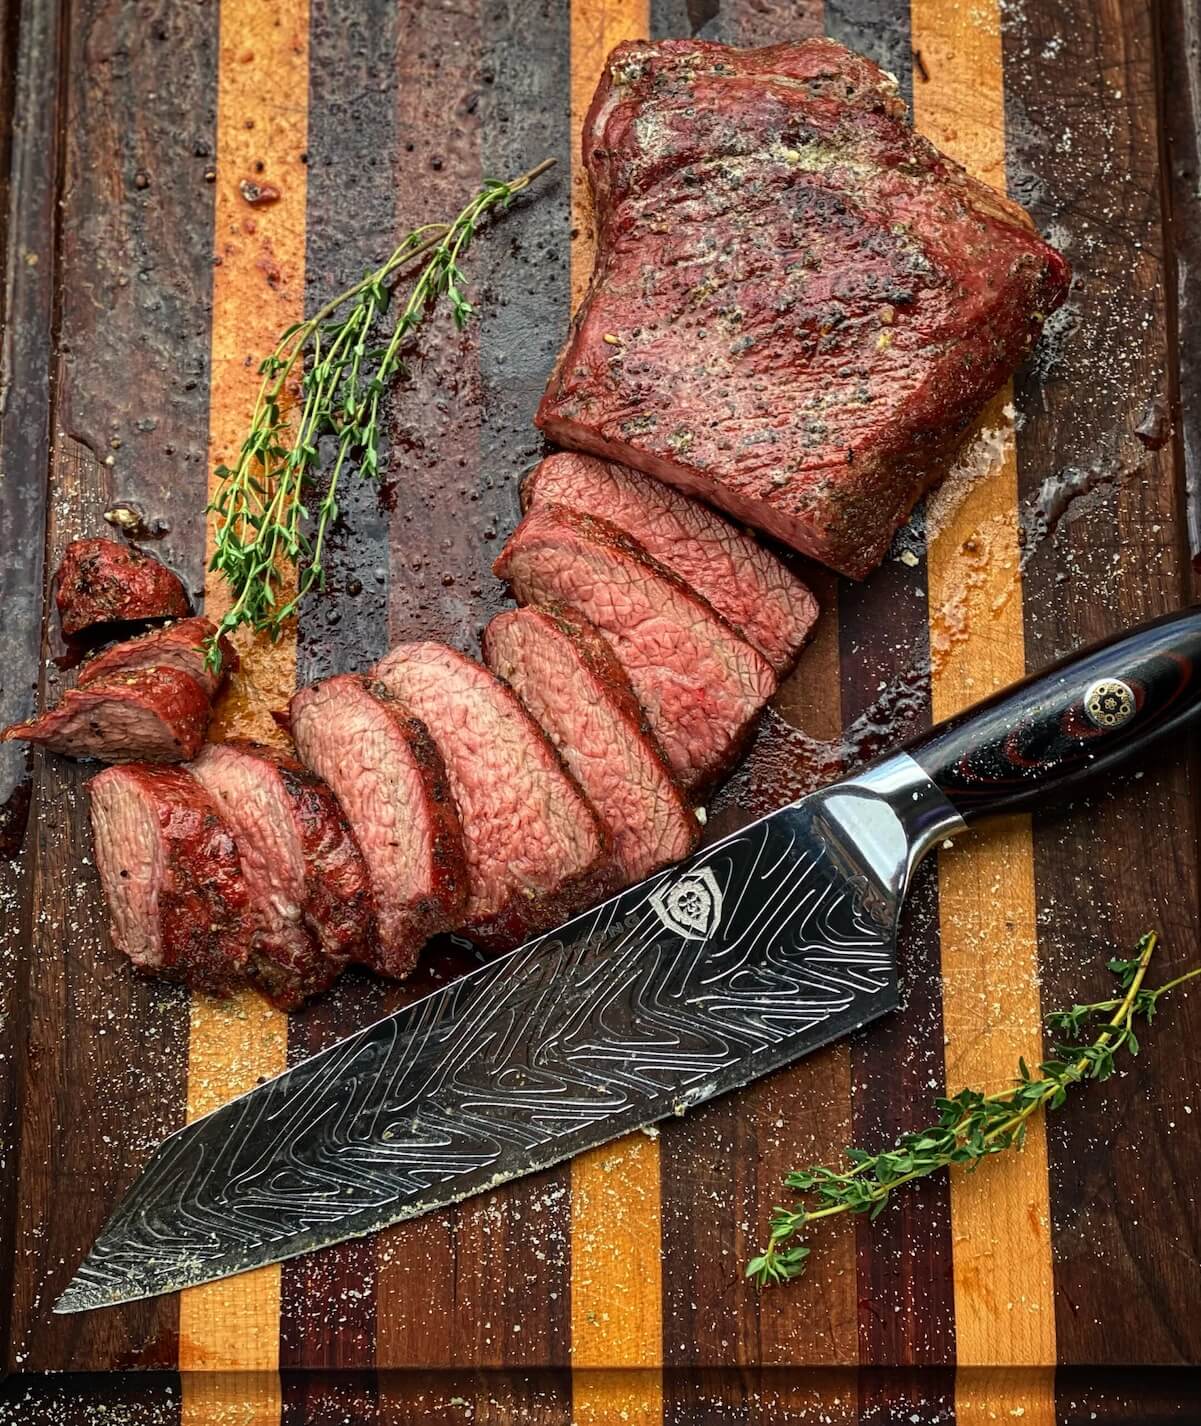 partially sliced tri tip on a wooden board.